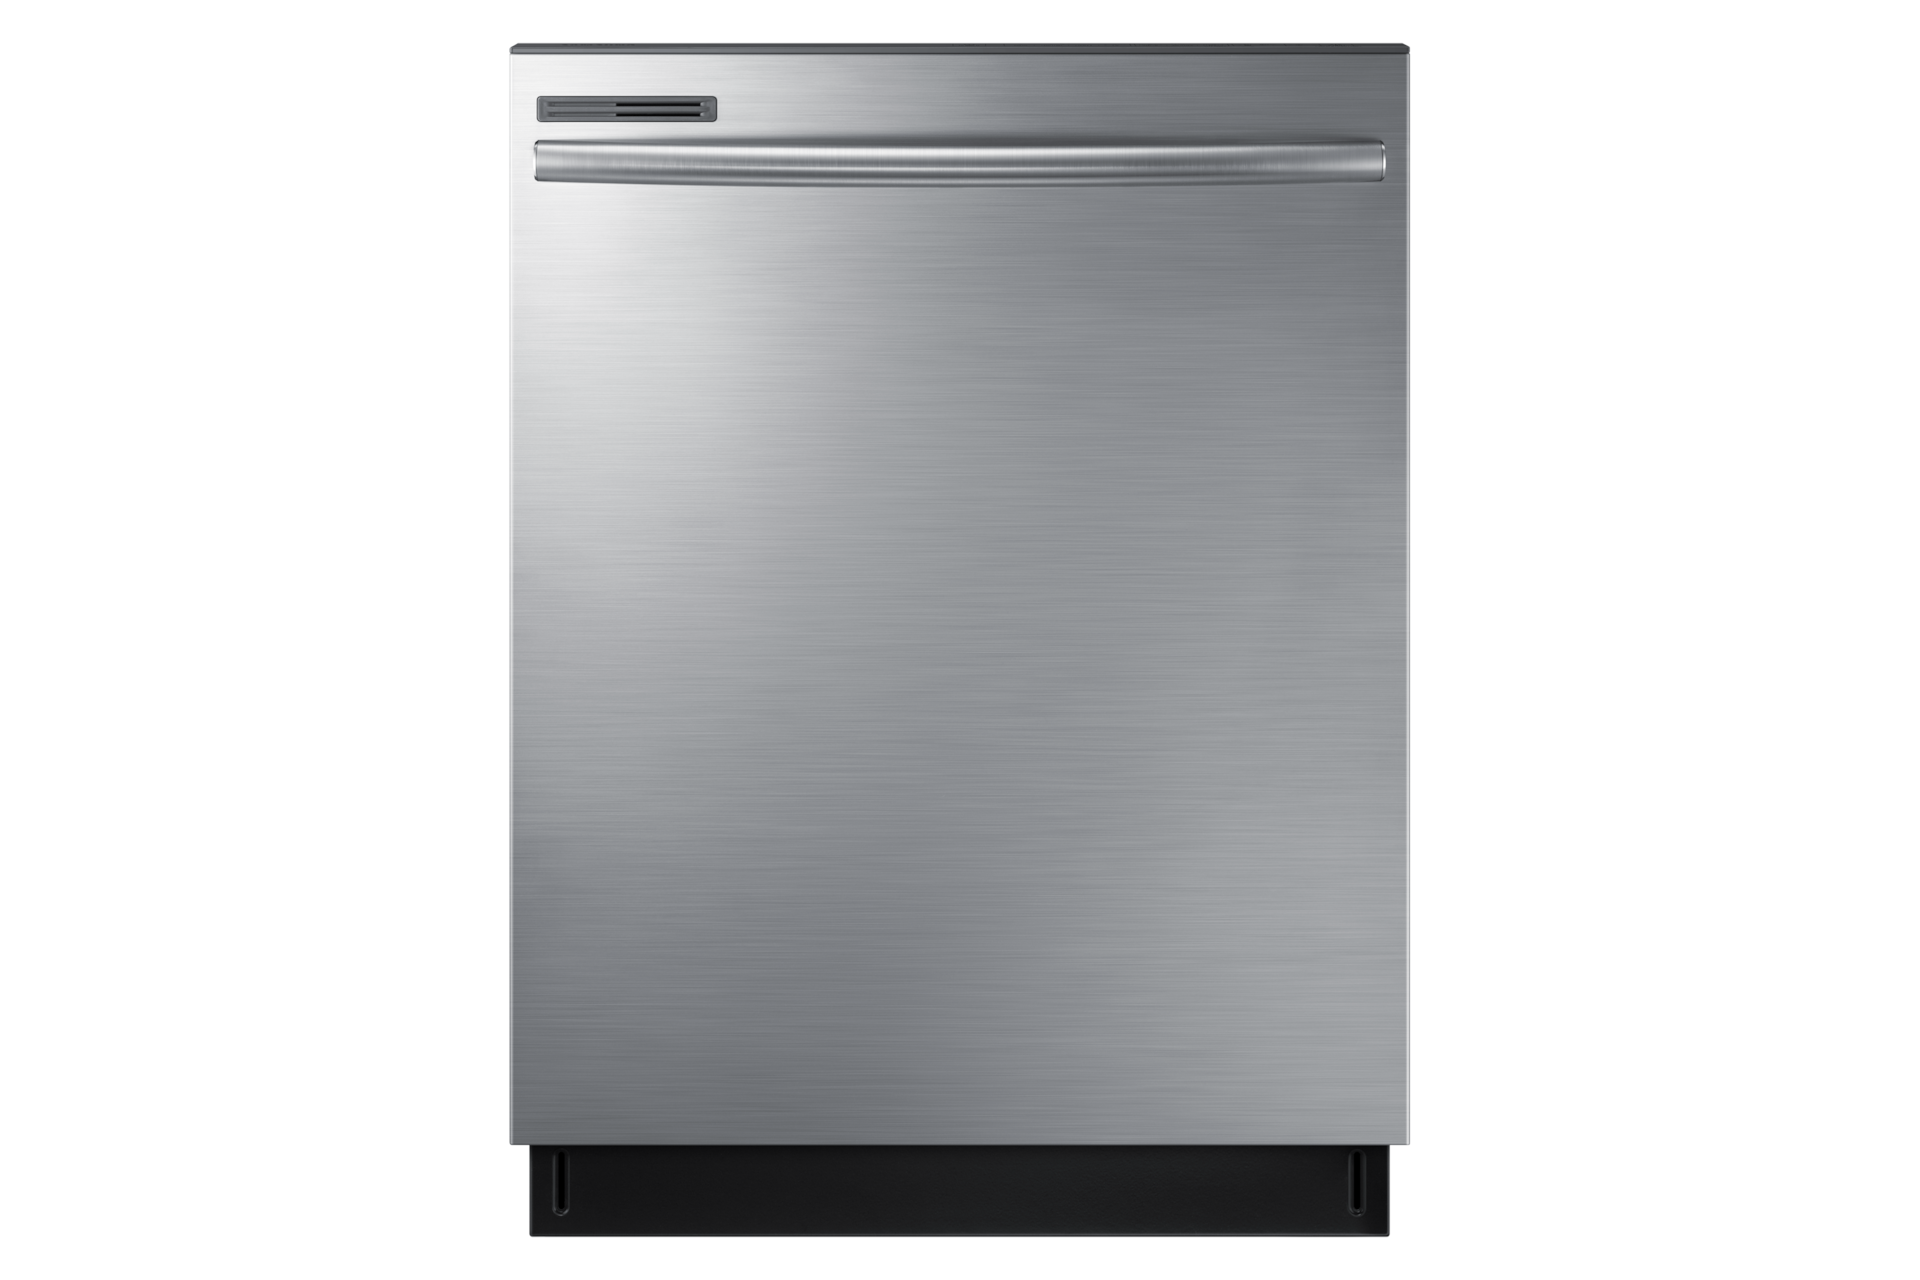 Samsung dishwasher cycles, options, and settings